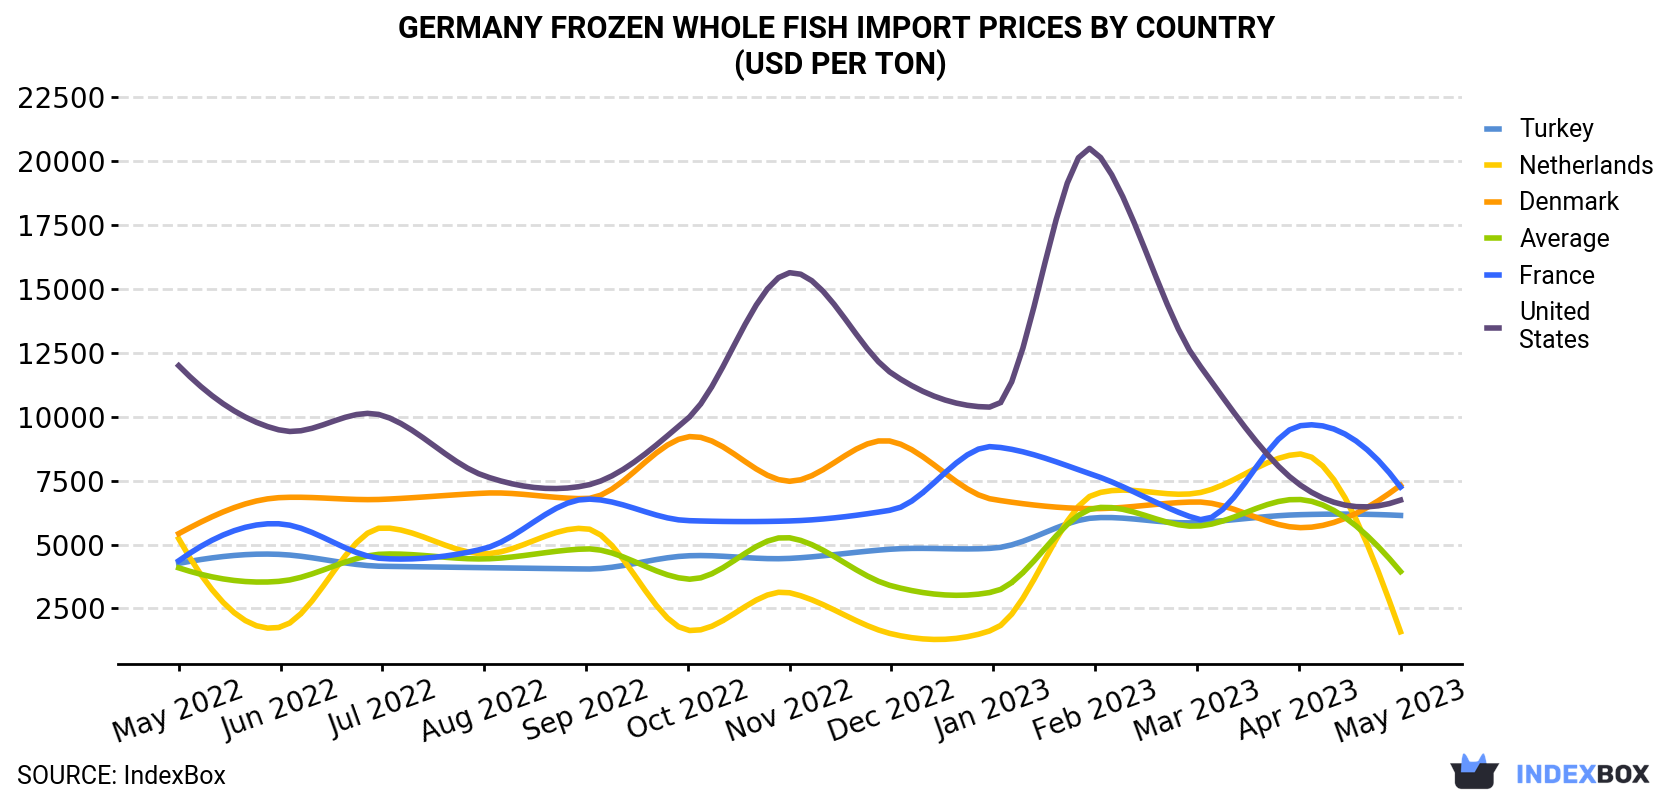 Germany Frozen Whole Fish Import Prices By Country (USD Per Ton)